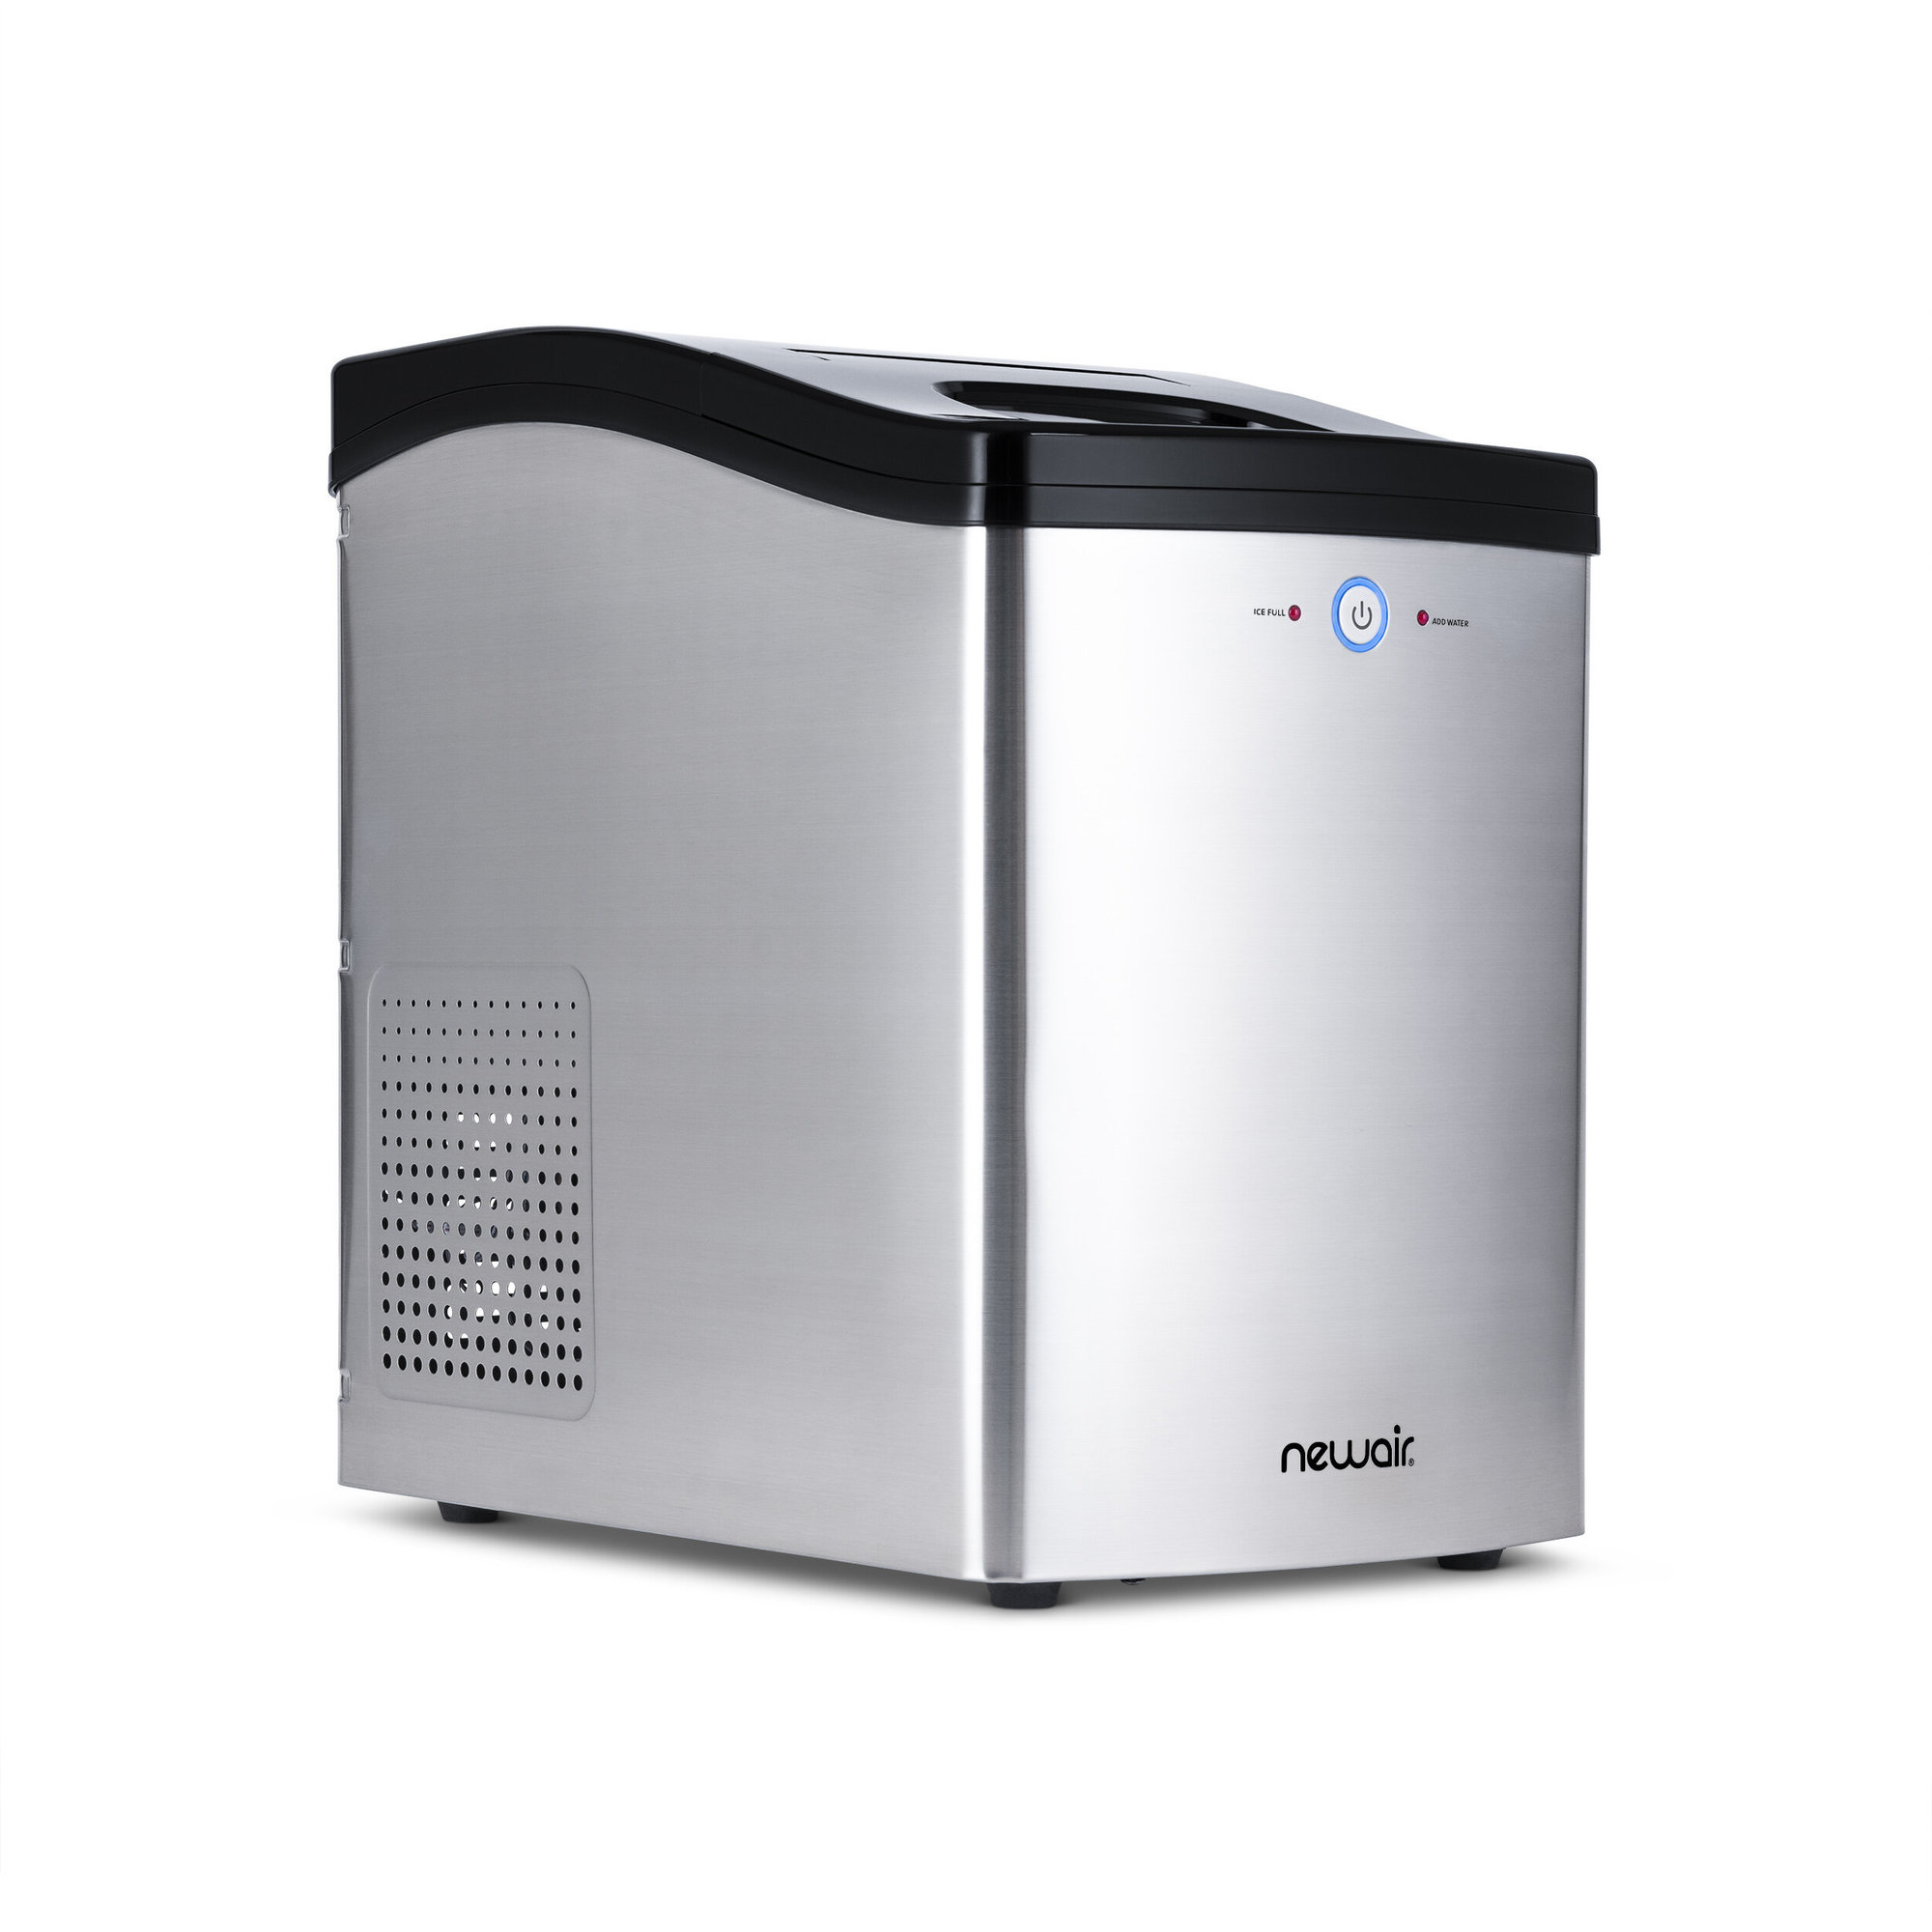 Newair, Countertop Nugget Ice Maker, Pounds of Ice Per Day 40 lb, Model#  NIM040SS00